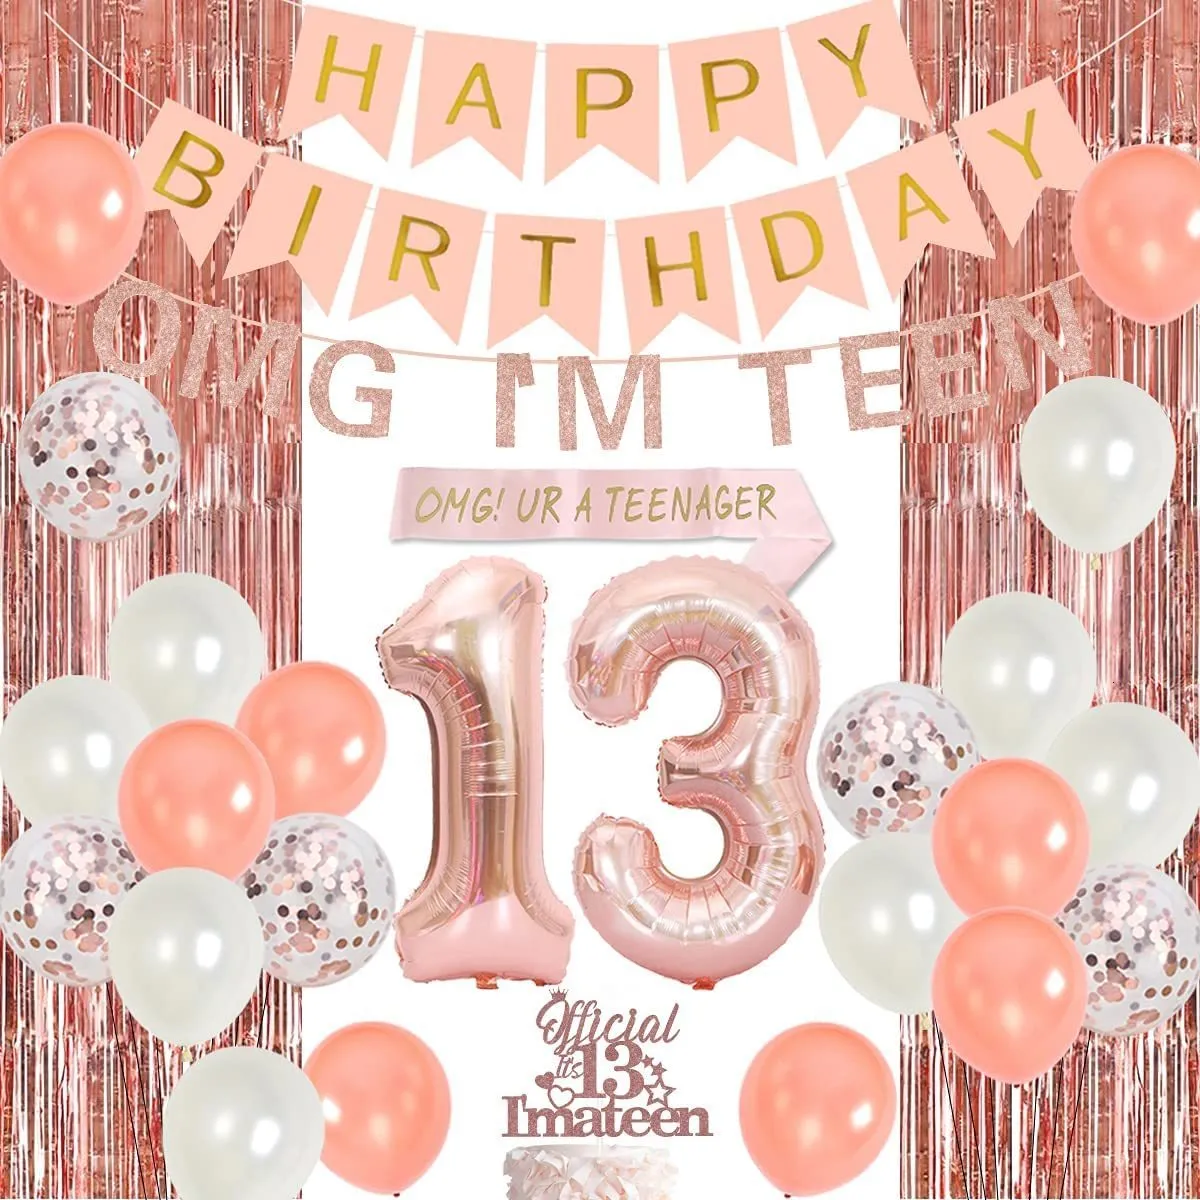 Other Event Party Supplies JOYMEMO 13th Birthday Decorations Rose Gold Balloon OMG UR A Teenager Sash Curtains Banner for Girls 13 Years Old Birthday Party 230309